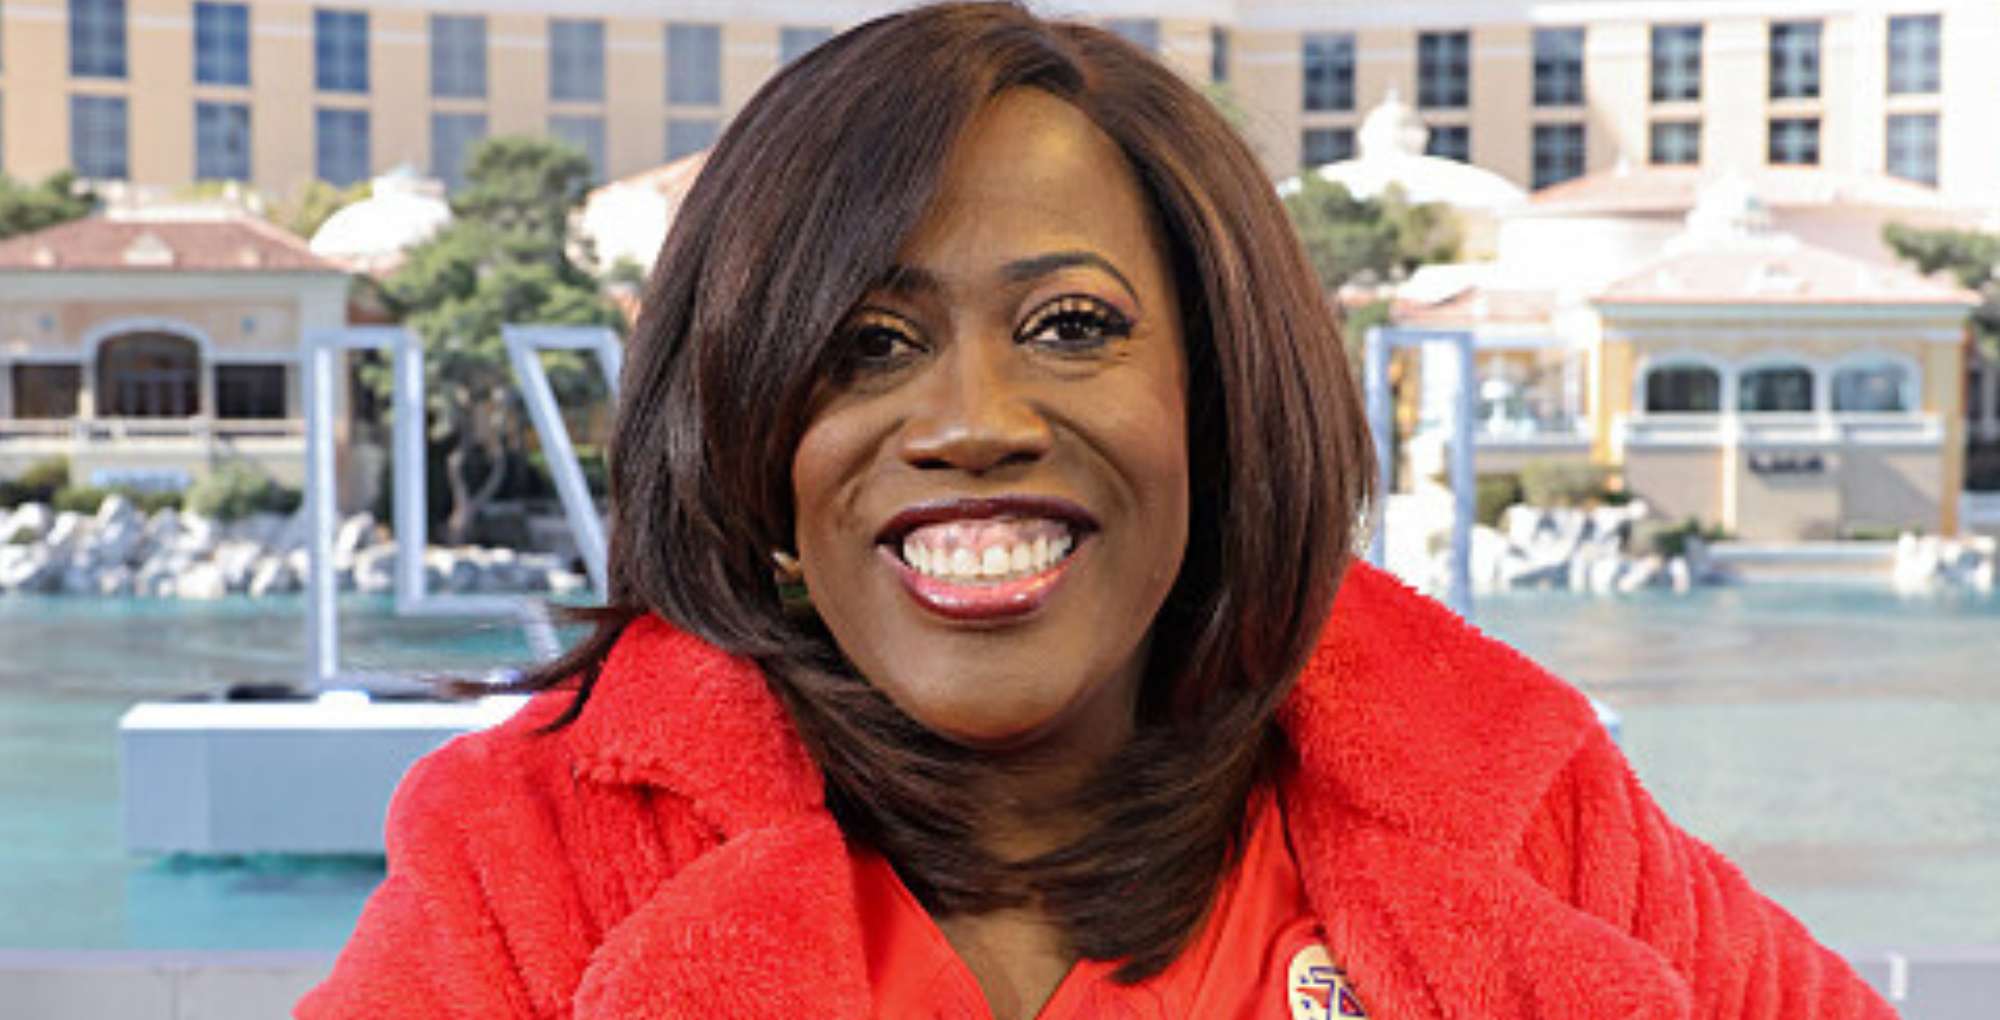 Sheryl Underwood of The Talk has some big ideas for The Bold and the Beautiful.